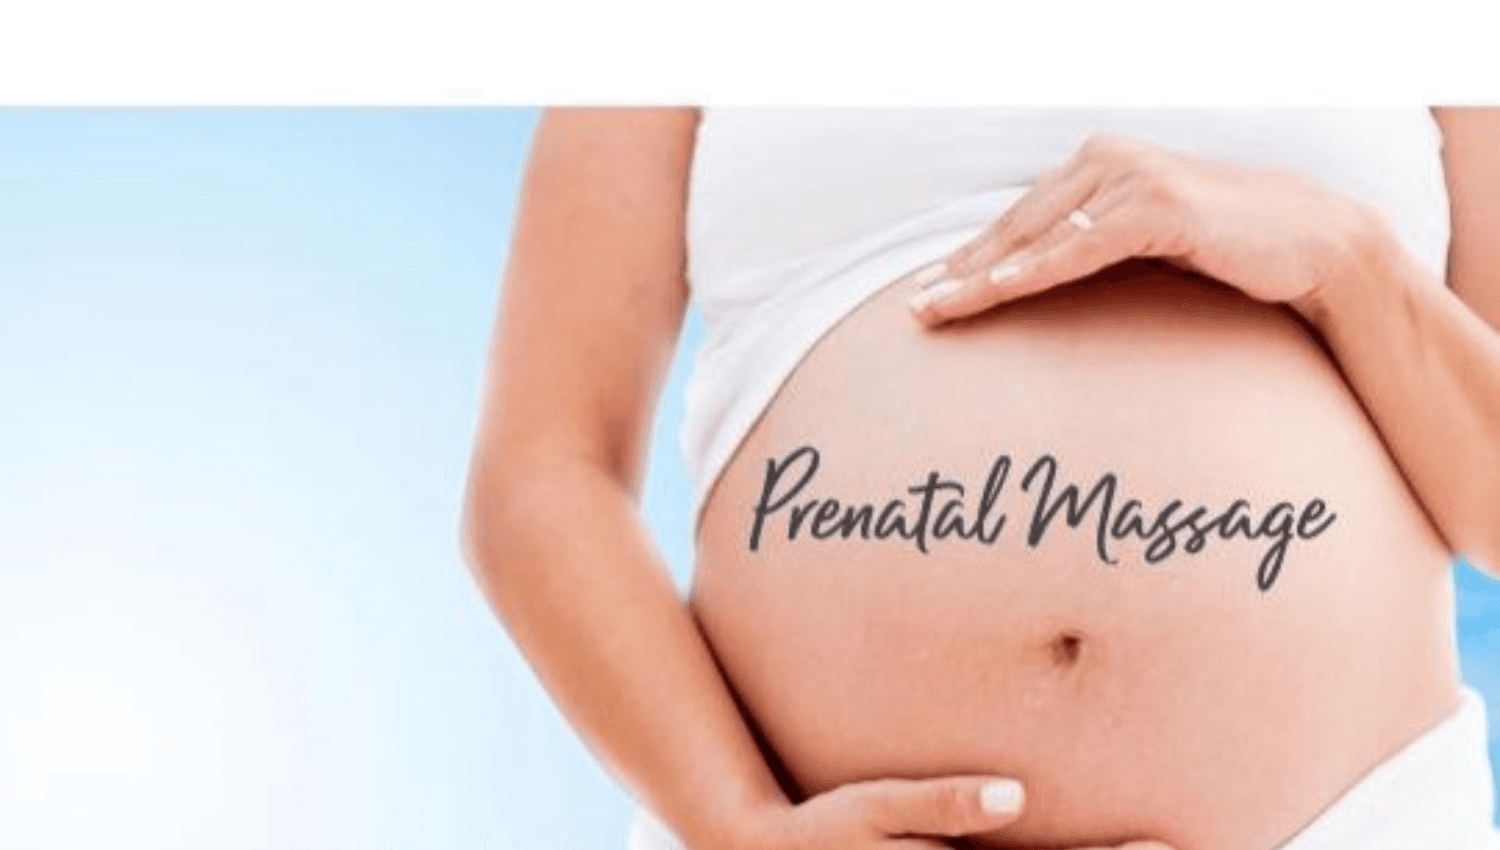 Image for 60 Minute Prenatal Massage Therapy Treatment